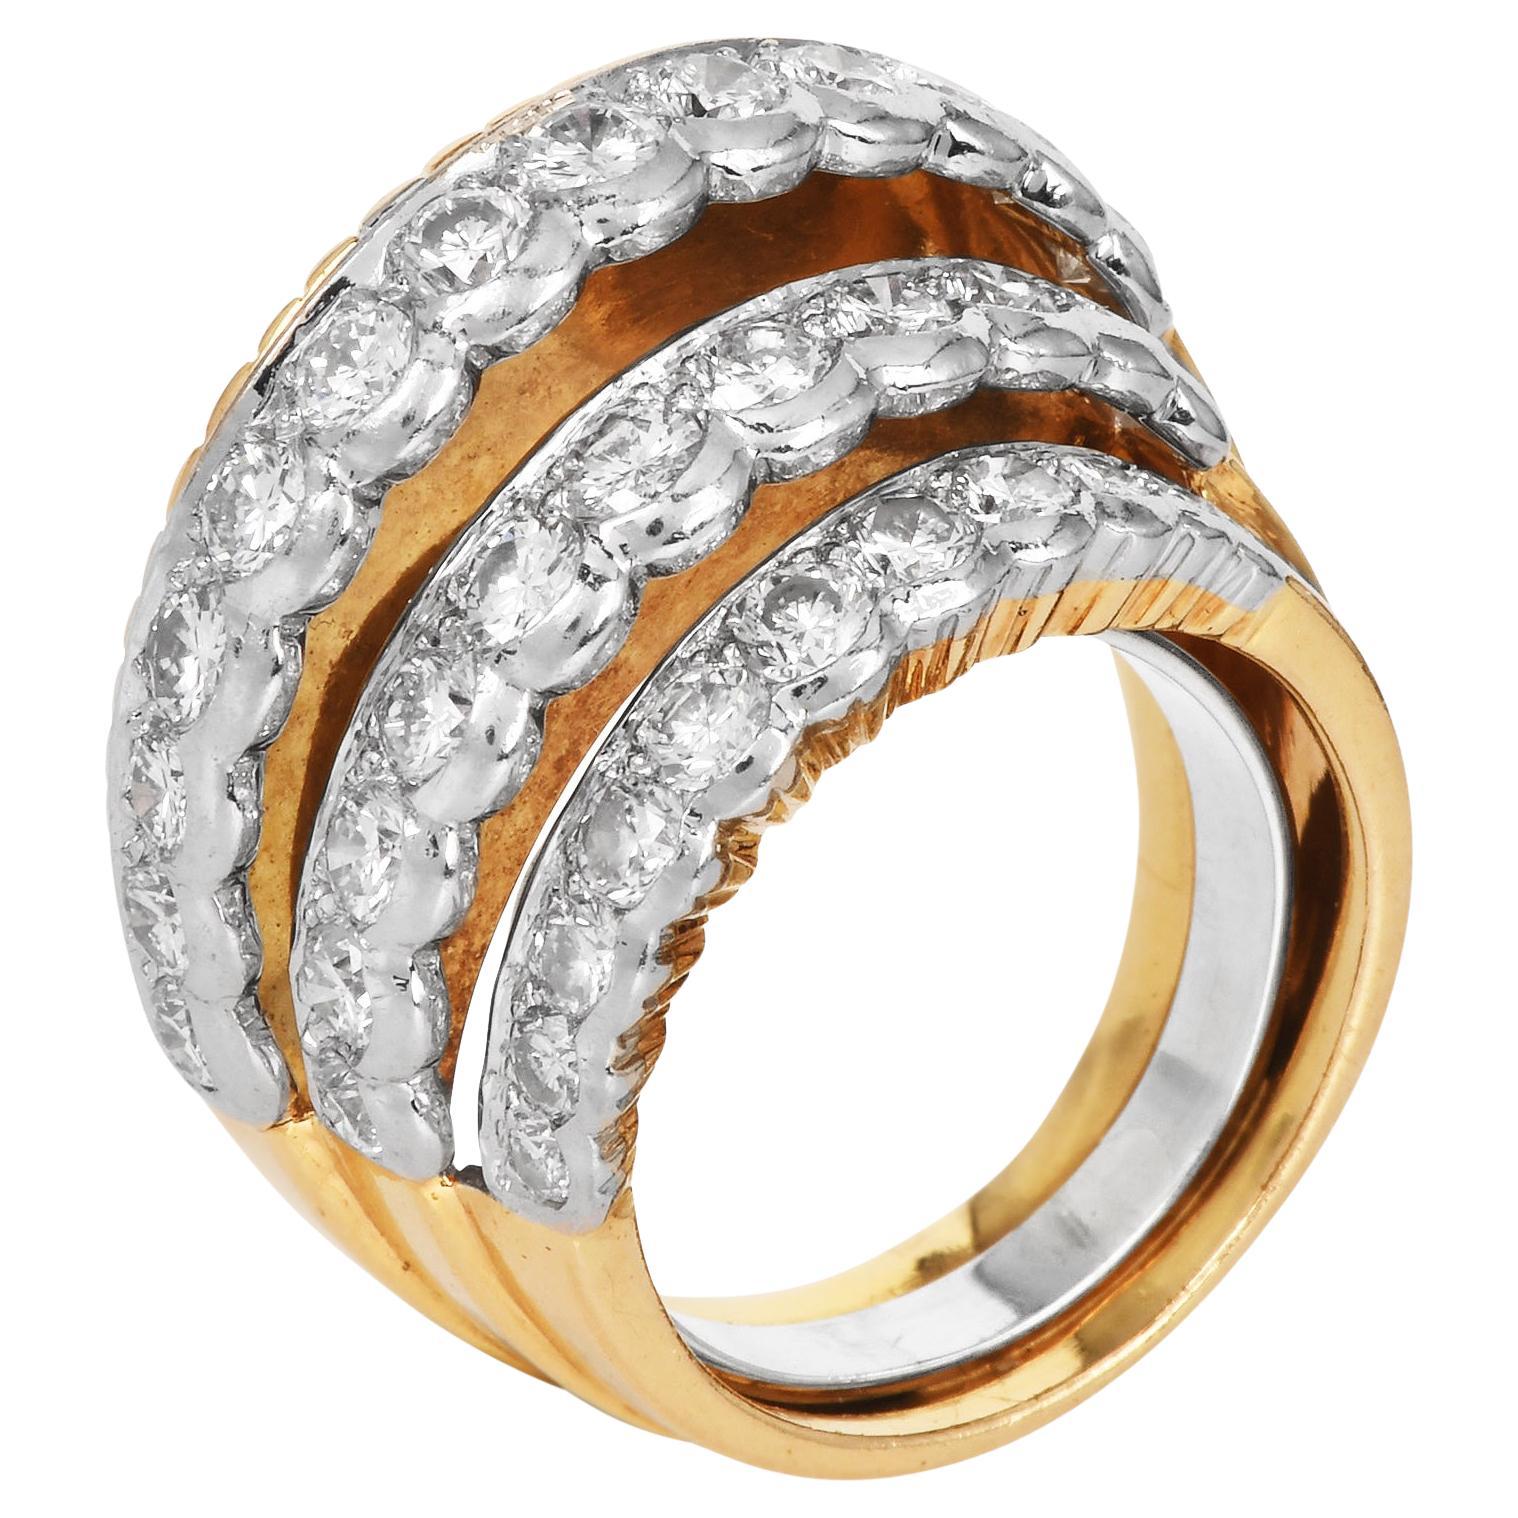 From the house of Cartier Paris, the architectural stepped ring crafted in 18K Yellow gold with Natural Diamonds presents a clever illusion.

The High Fan three-layer arch is set with diamonds in Platinum 35 Brilliant Round cut approximately 2.86